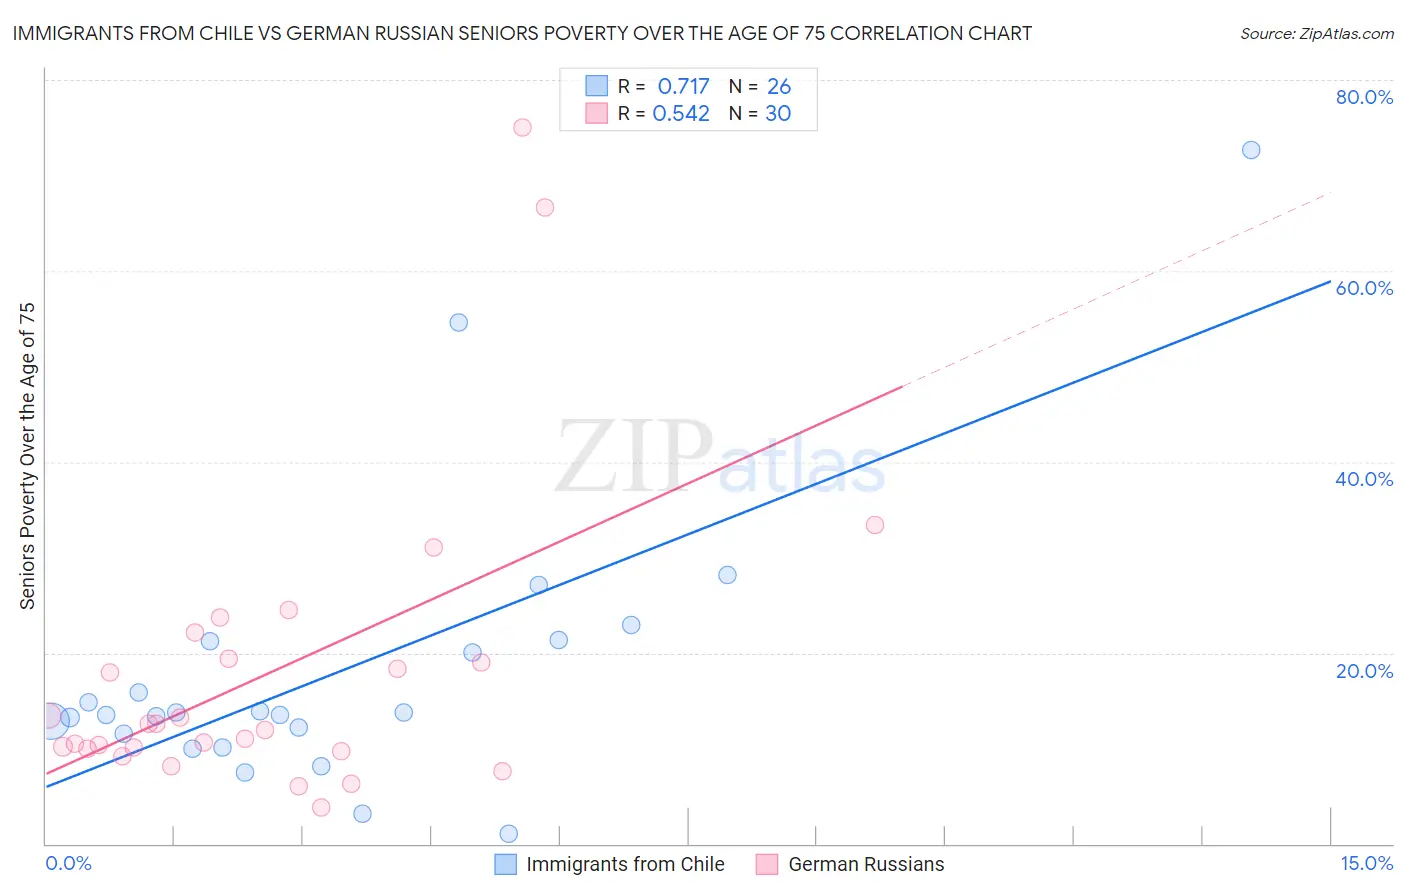 Immigrants from Chile vs German Russian Seniors Poverty Over the Age of 75